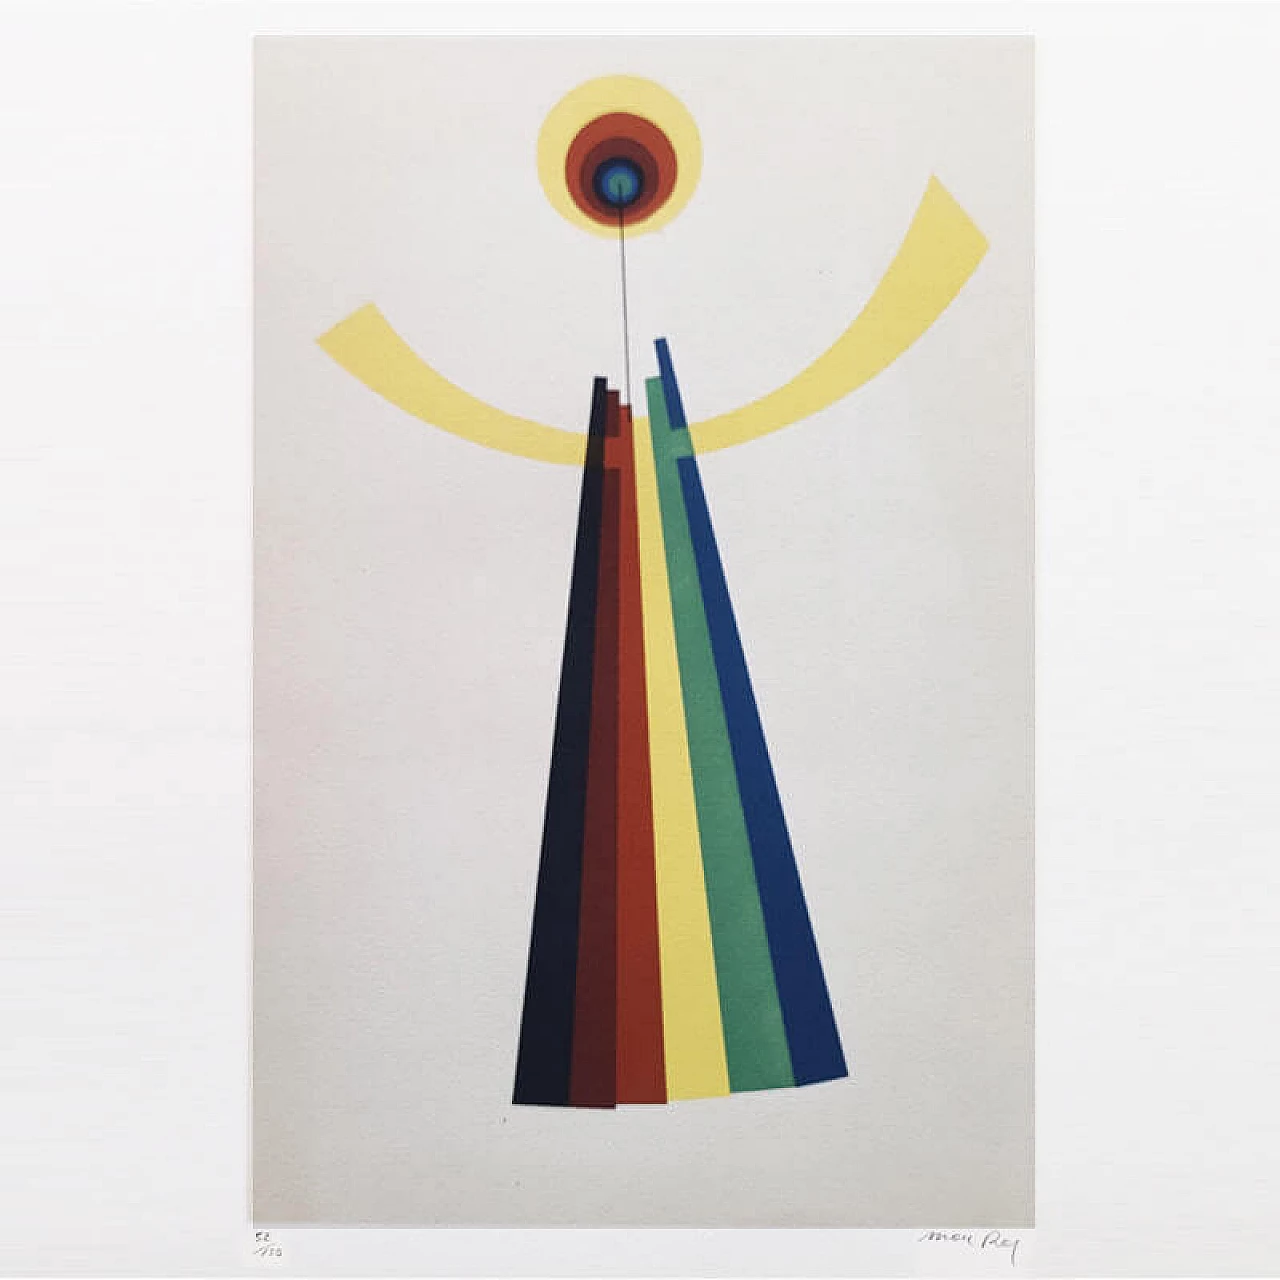 Man Ray, the mime, limited edition lithograph, 1972 2